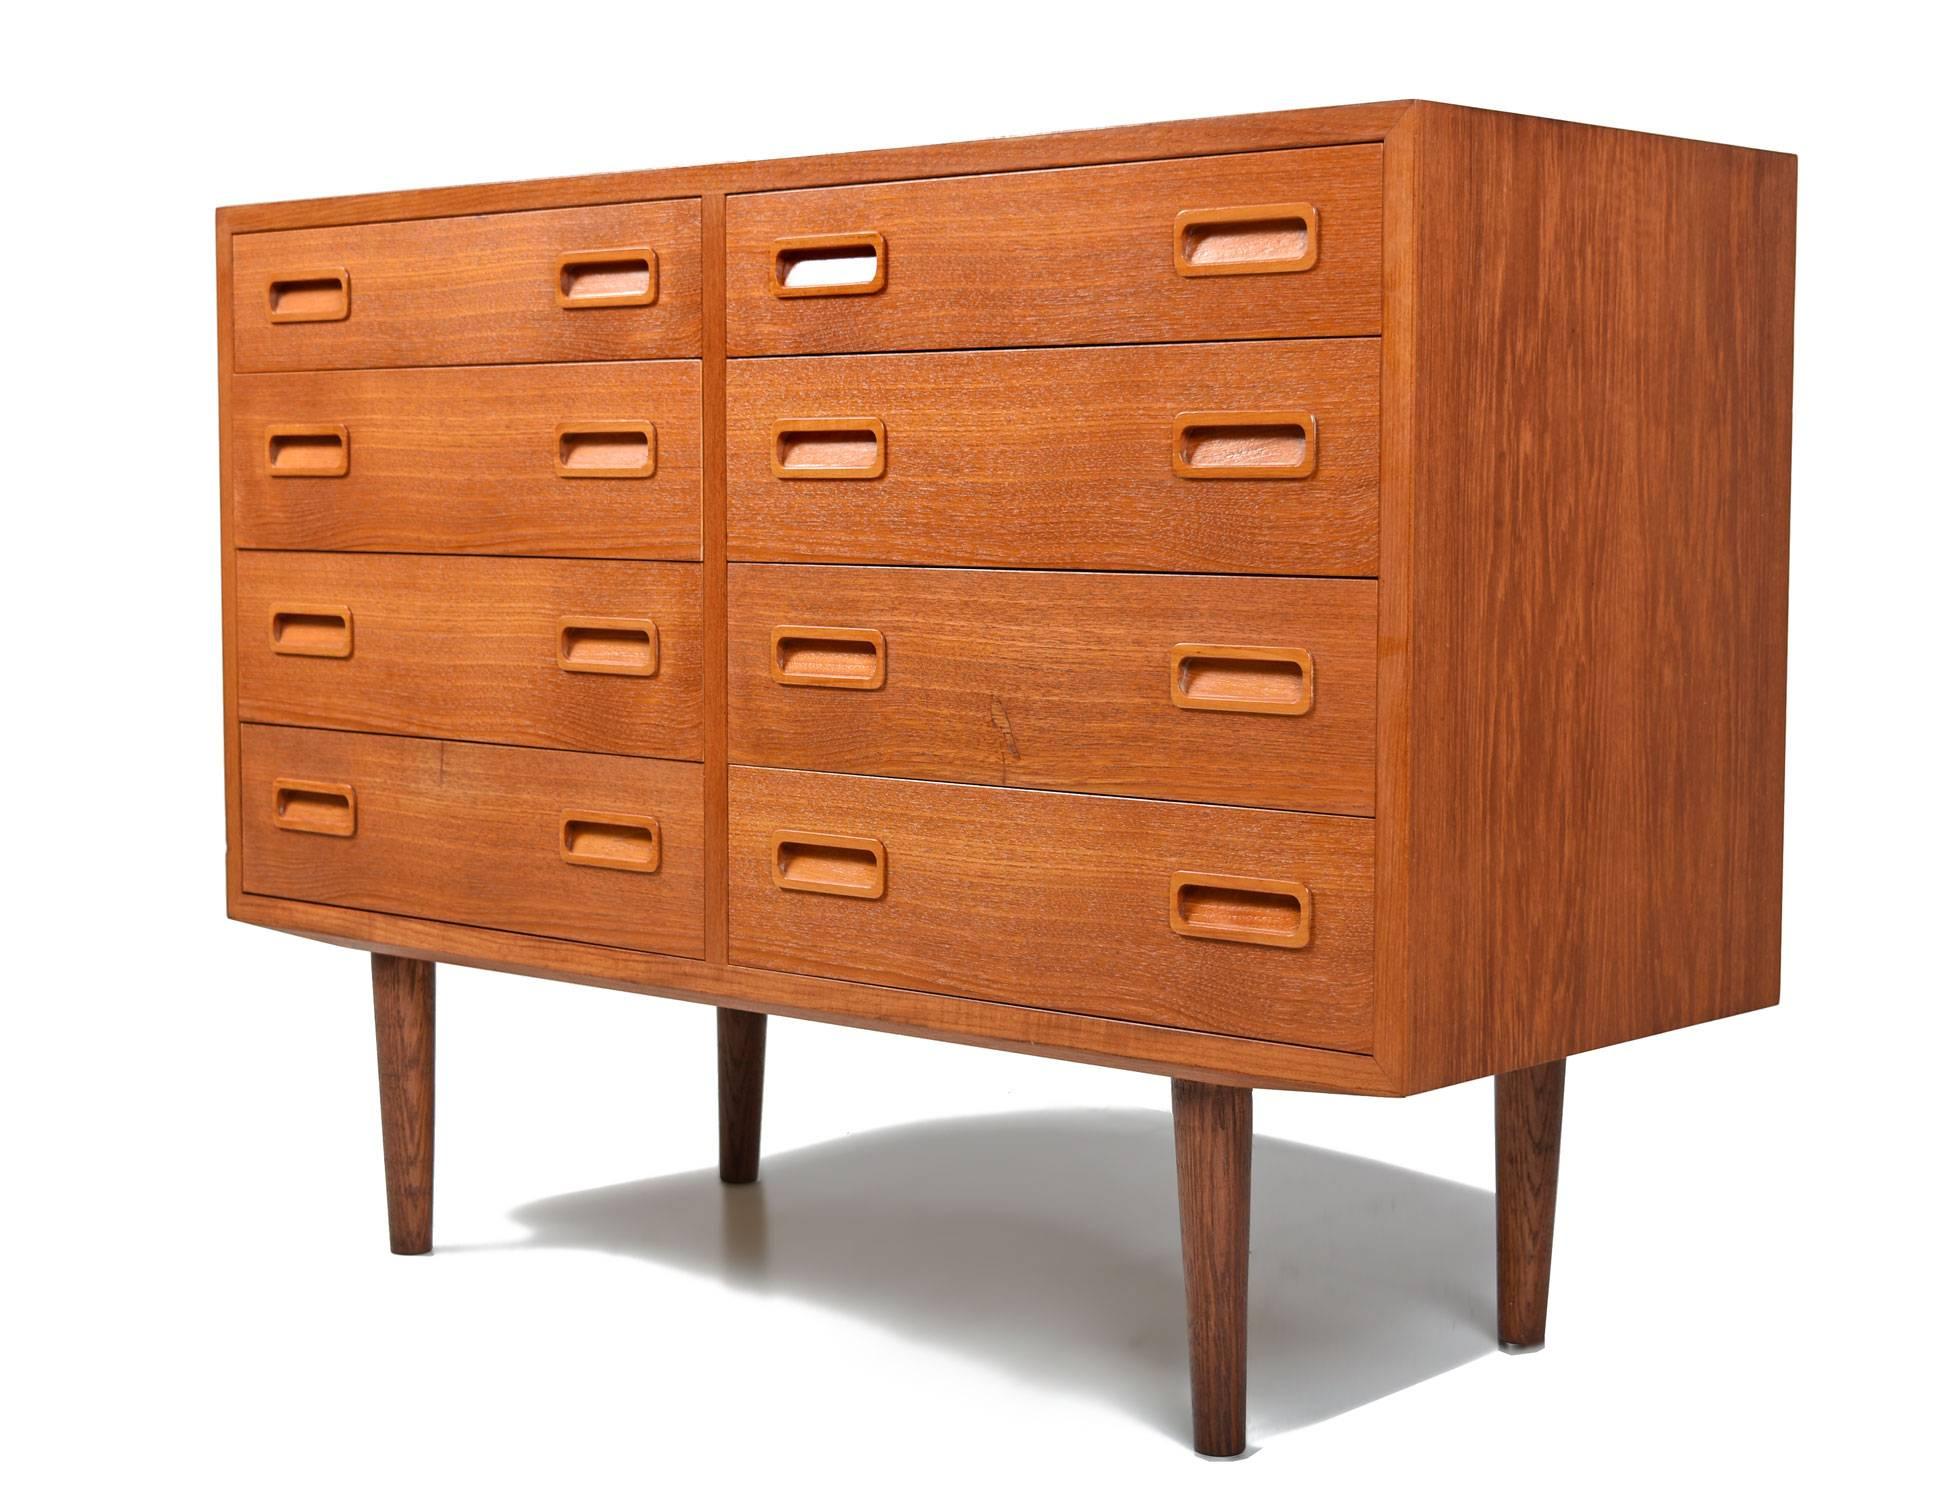 Mid-Century Modern Danish teak dresser by esteemed maker, Poul Hundevad. The unit features eight slim drawers and solid teak recessed handles. The dresser has an uncommon dimension. If you are looking for a piece this size, do not hesitate, it will